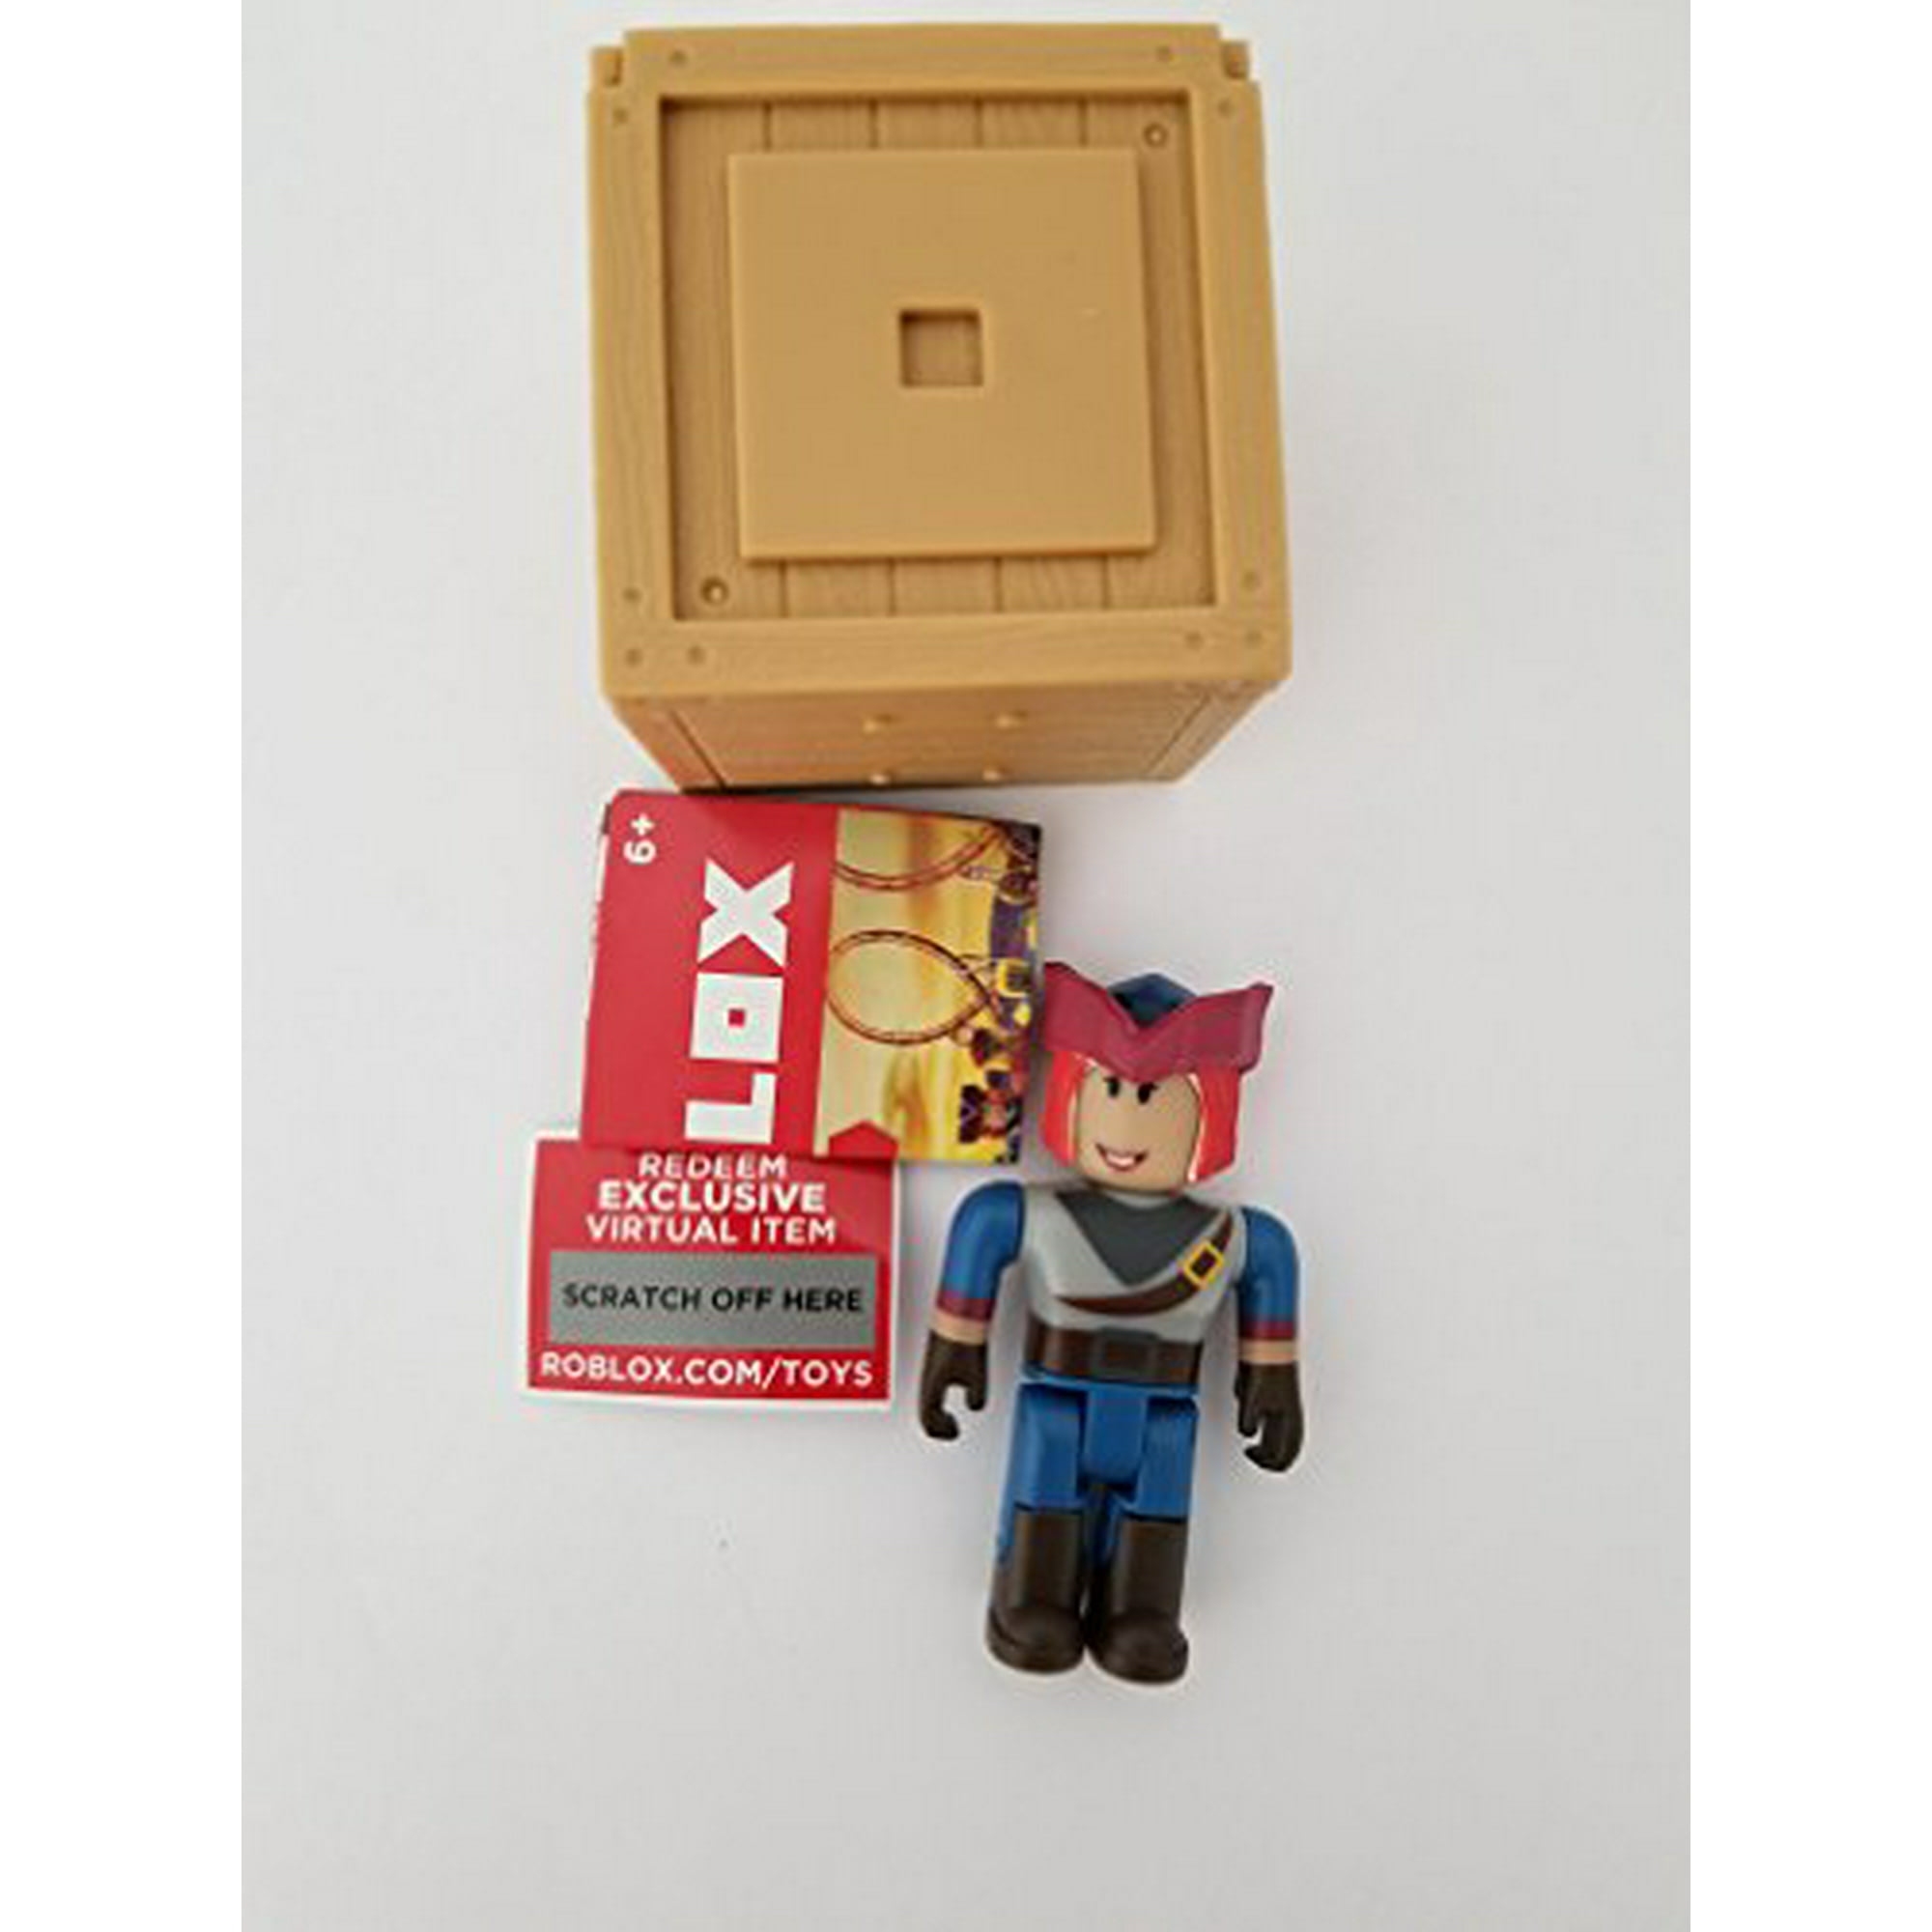 Roblox Series 2 Ezebel The Pirate Queen Action Figure Mystery Box Virtual Item Code 2 5 Walmart Canada - pirate animation roblox